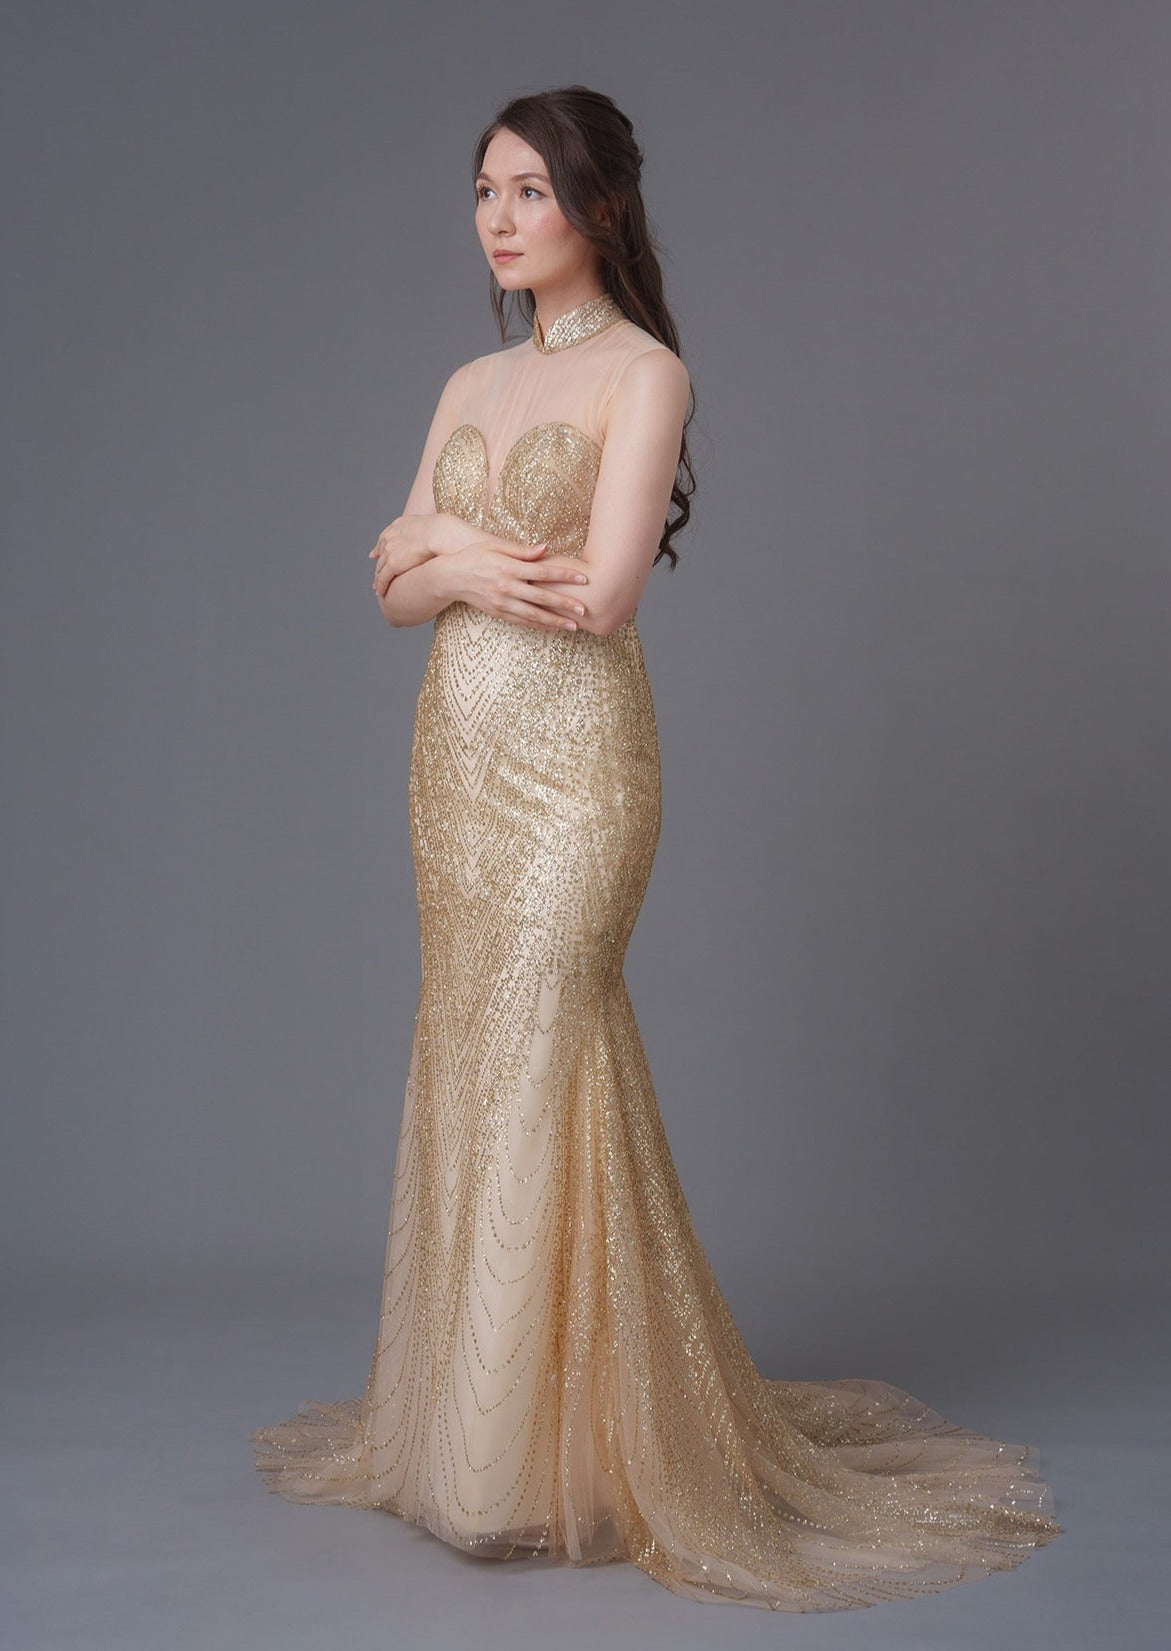 An asian girl in a sleeveless gold sequins mermaid qipao with mesh heart shape bodice. Perfect dress for cocktail parties/ wedding. (Side view picture)